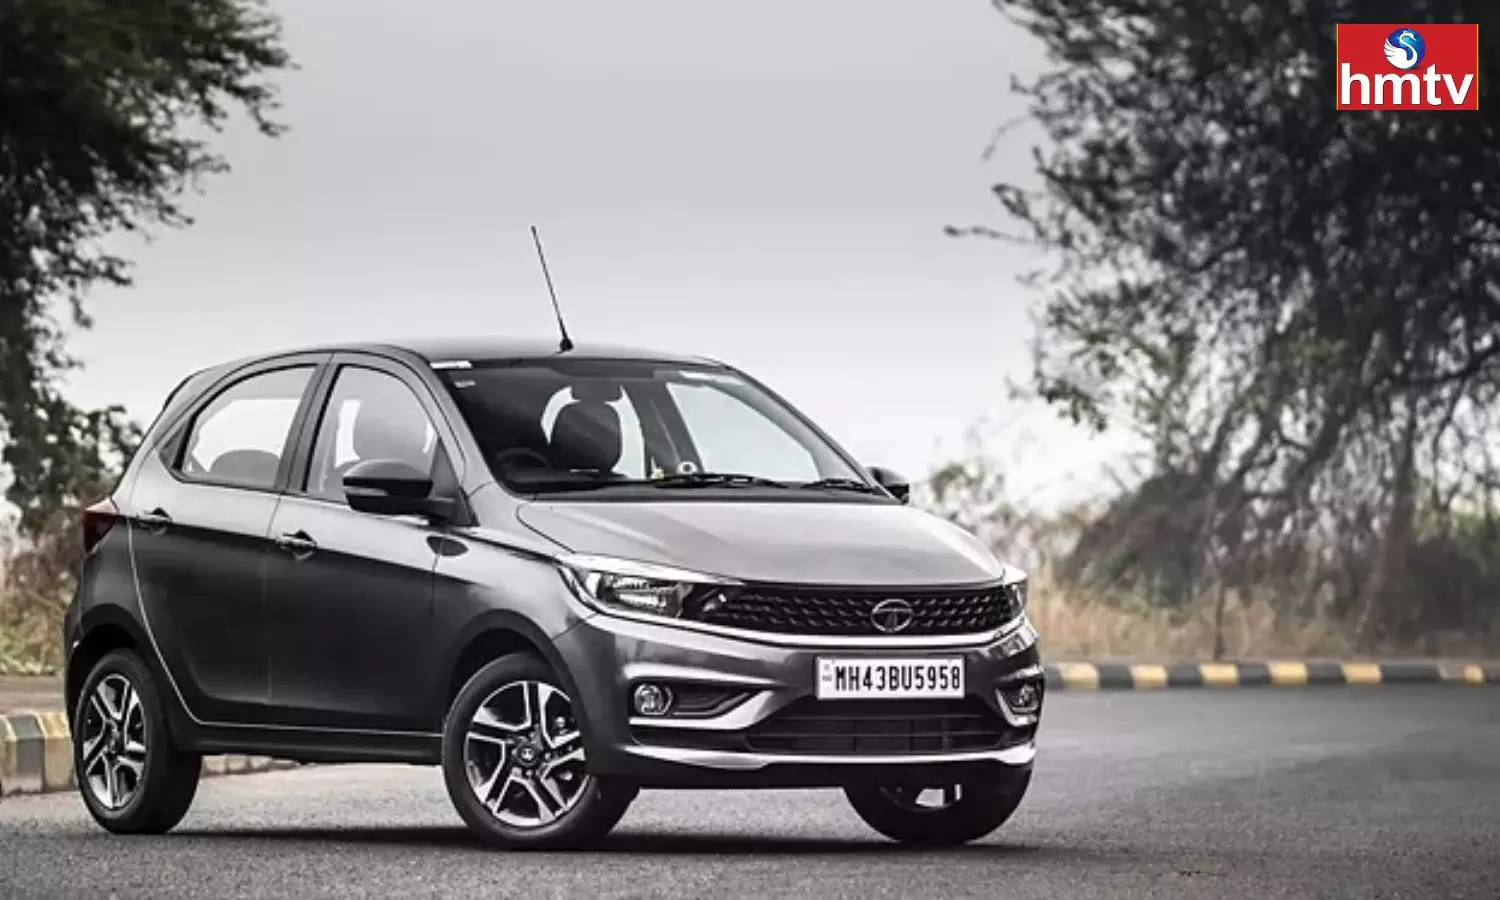 Tata Tiago Gives 19 Kmpl Mileage With 4 Star Safety Rating Check Price And Features